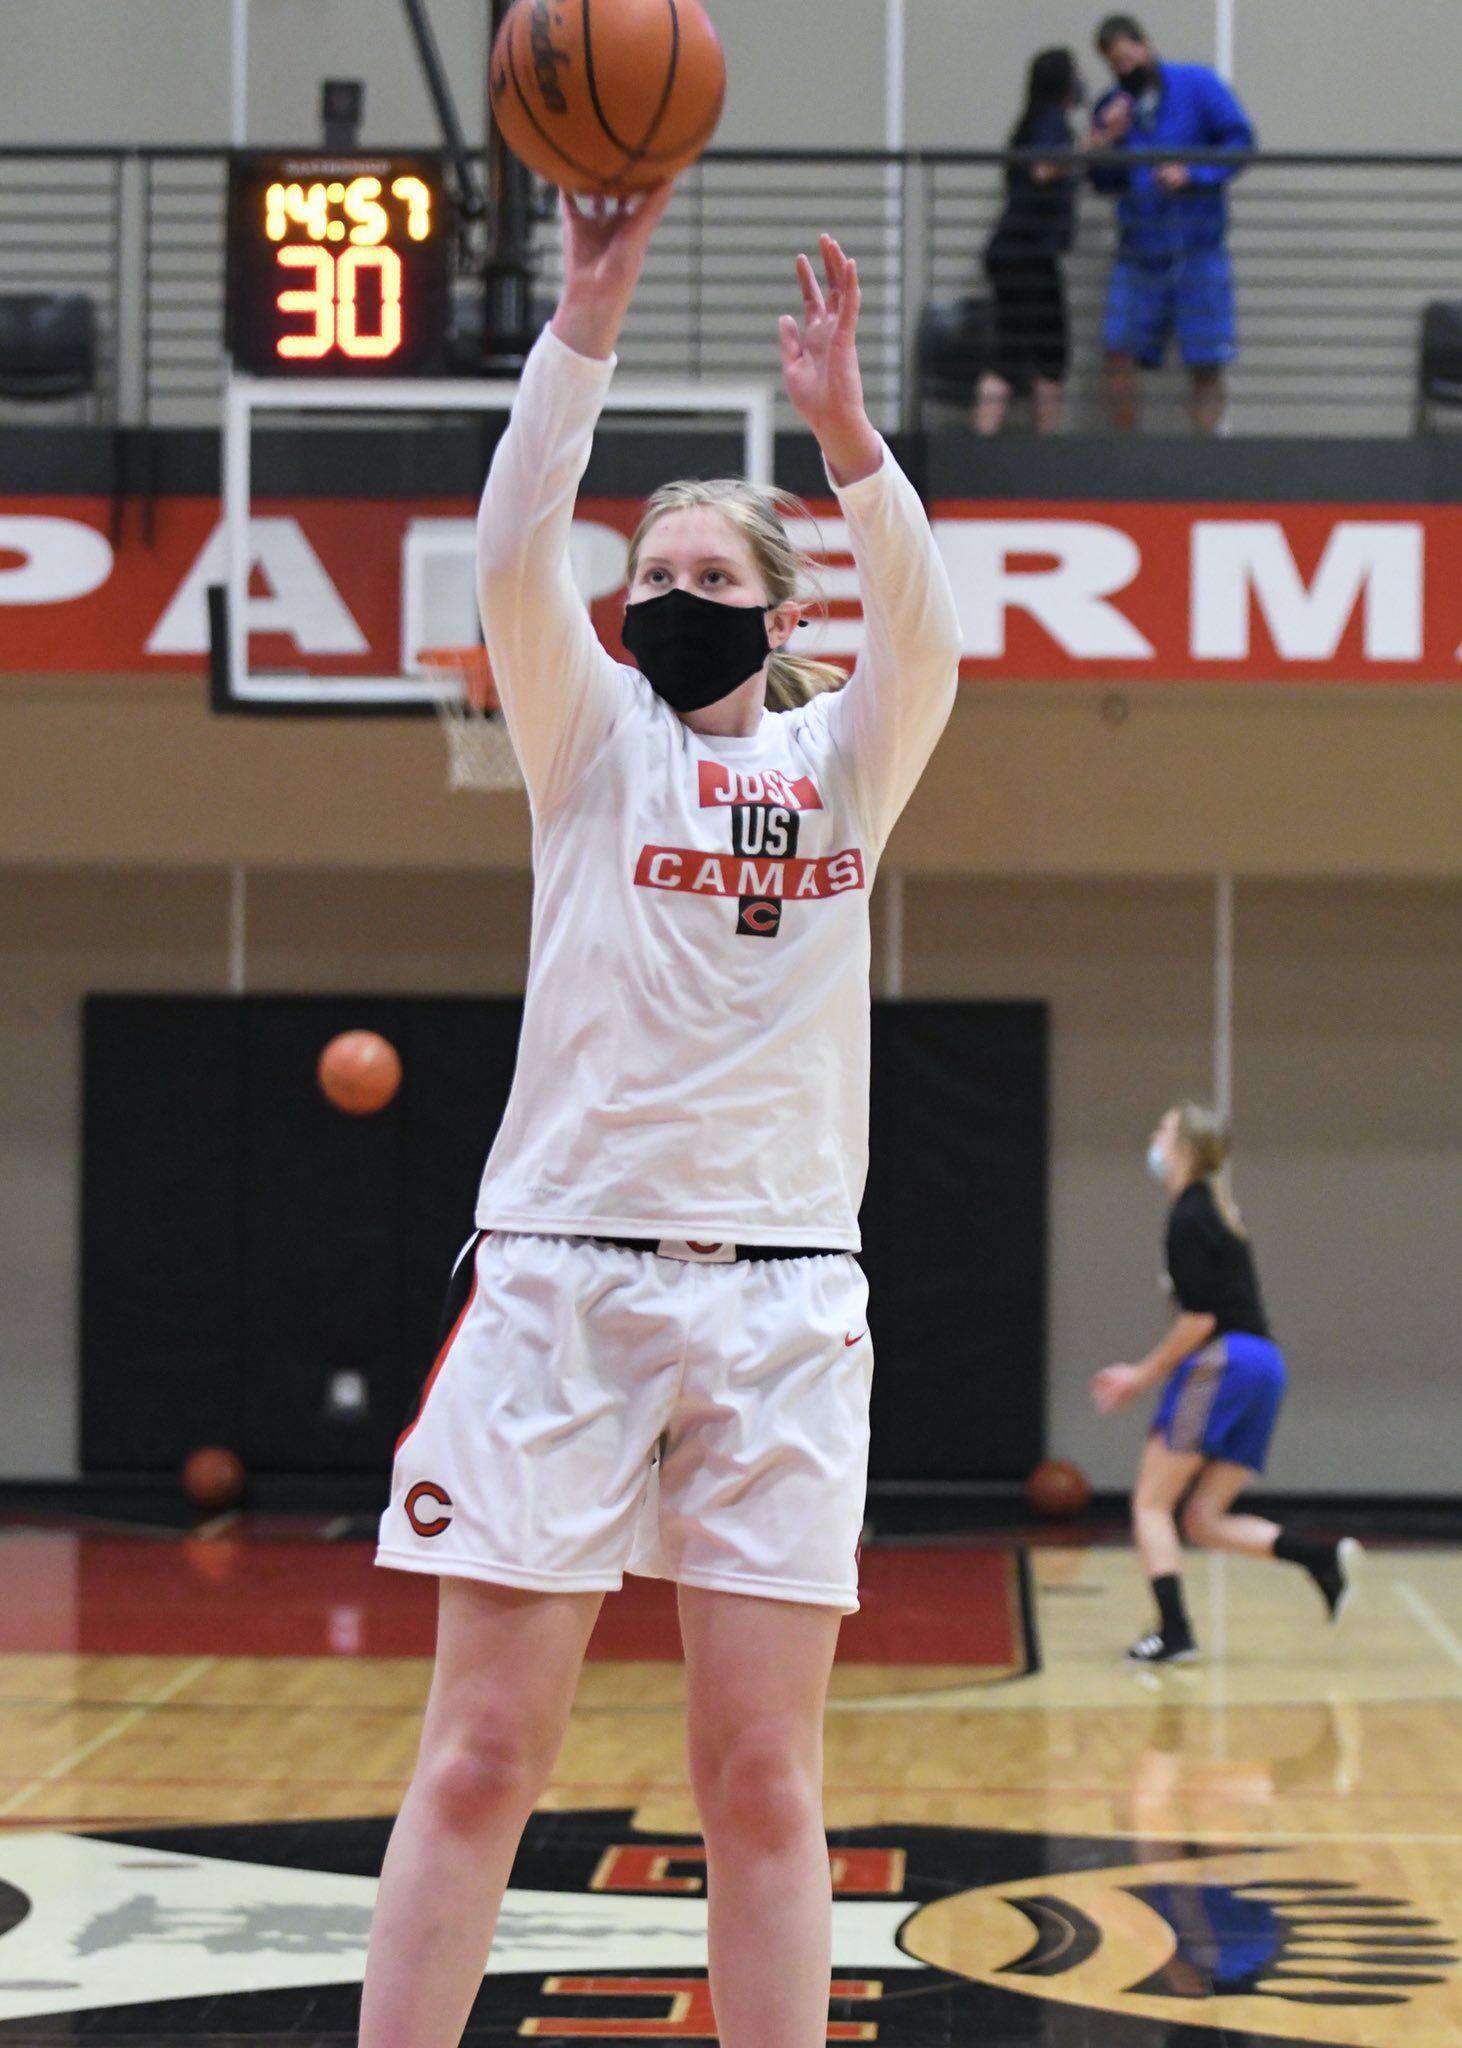 Faith Bergstrom dominated the paint for the Papermakers in Friday’s win over Union. She scored 24 points. Photo courtesy Kris Cavin